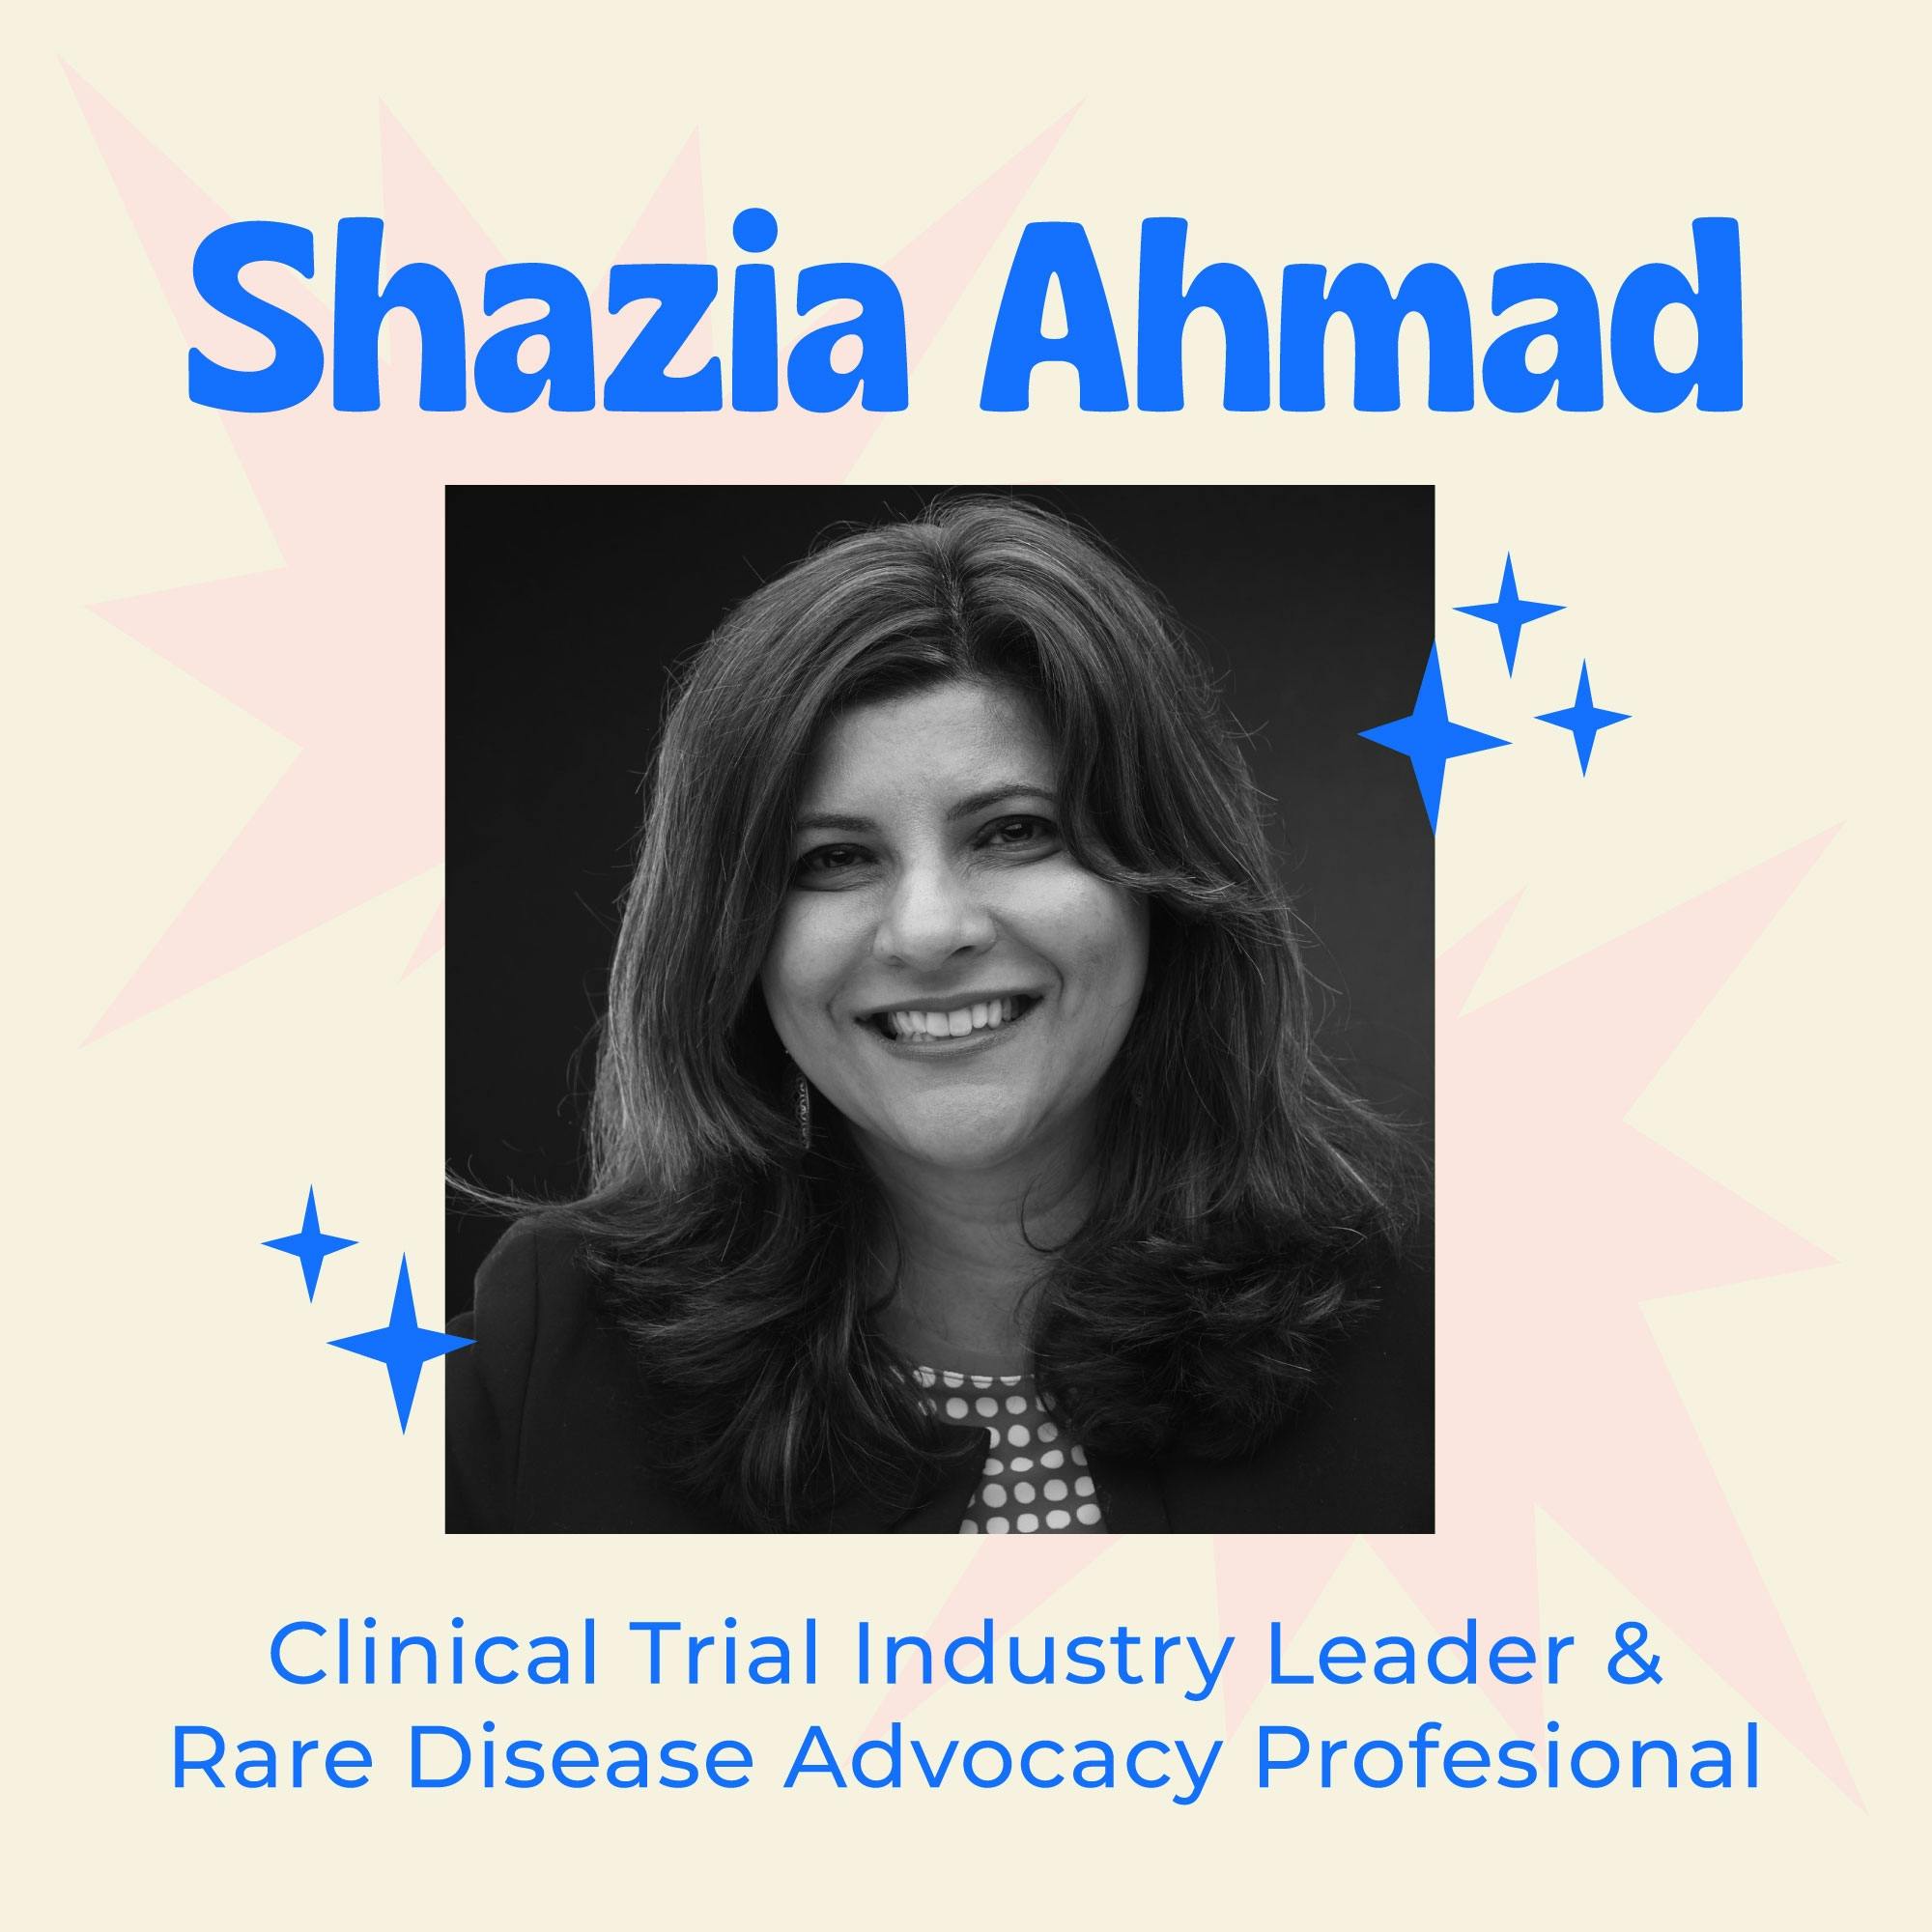 Ensuring that the Patient and Caregiver Voice are Part of Clinical Trial Design and Engagement – Bridging the Gap with Industry with Shazia Ahmad